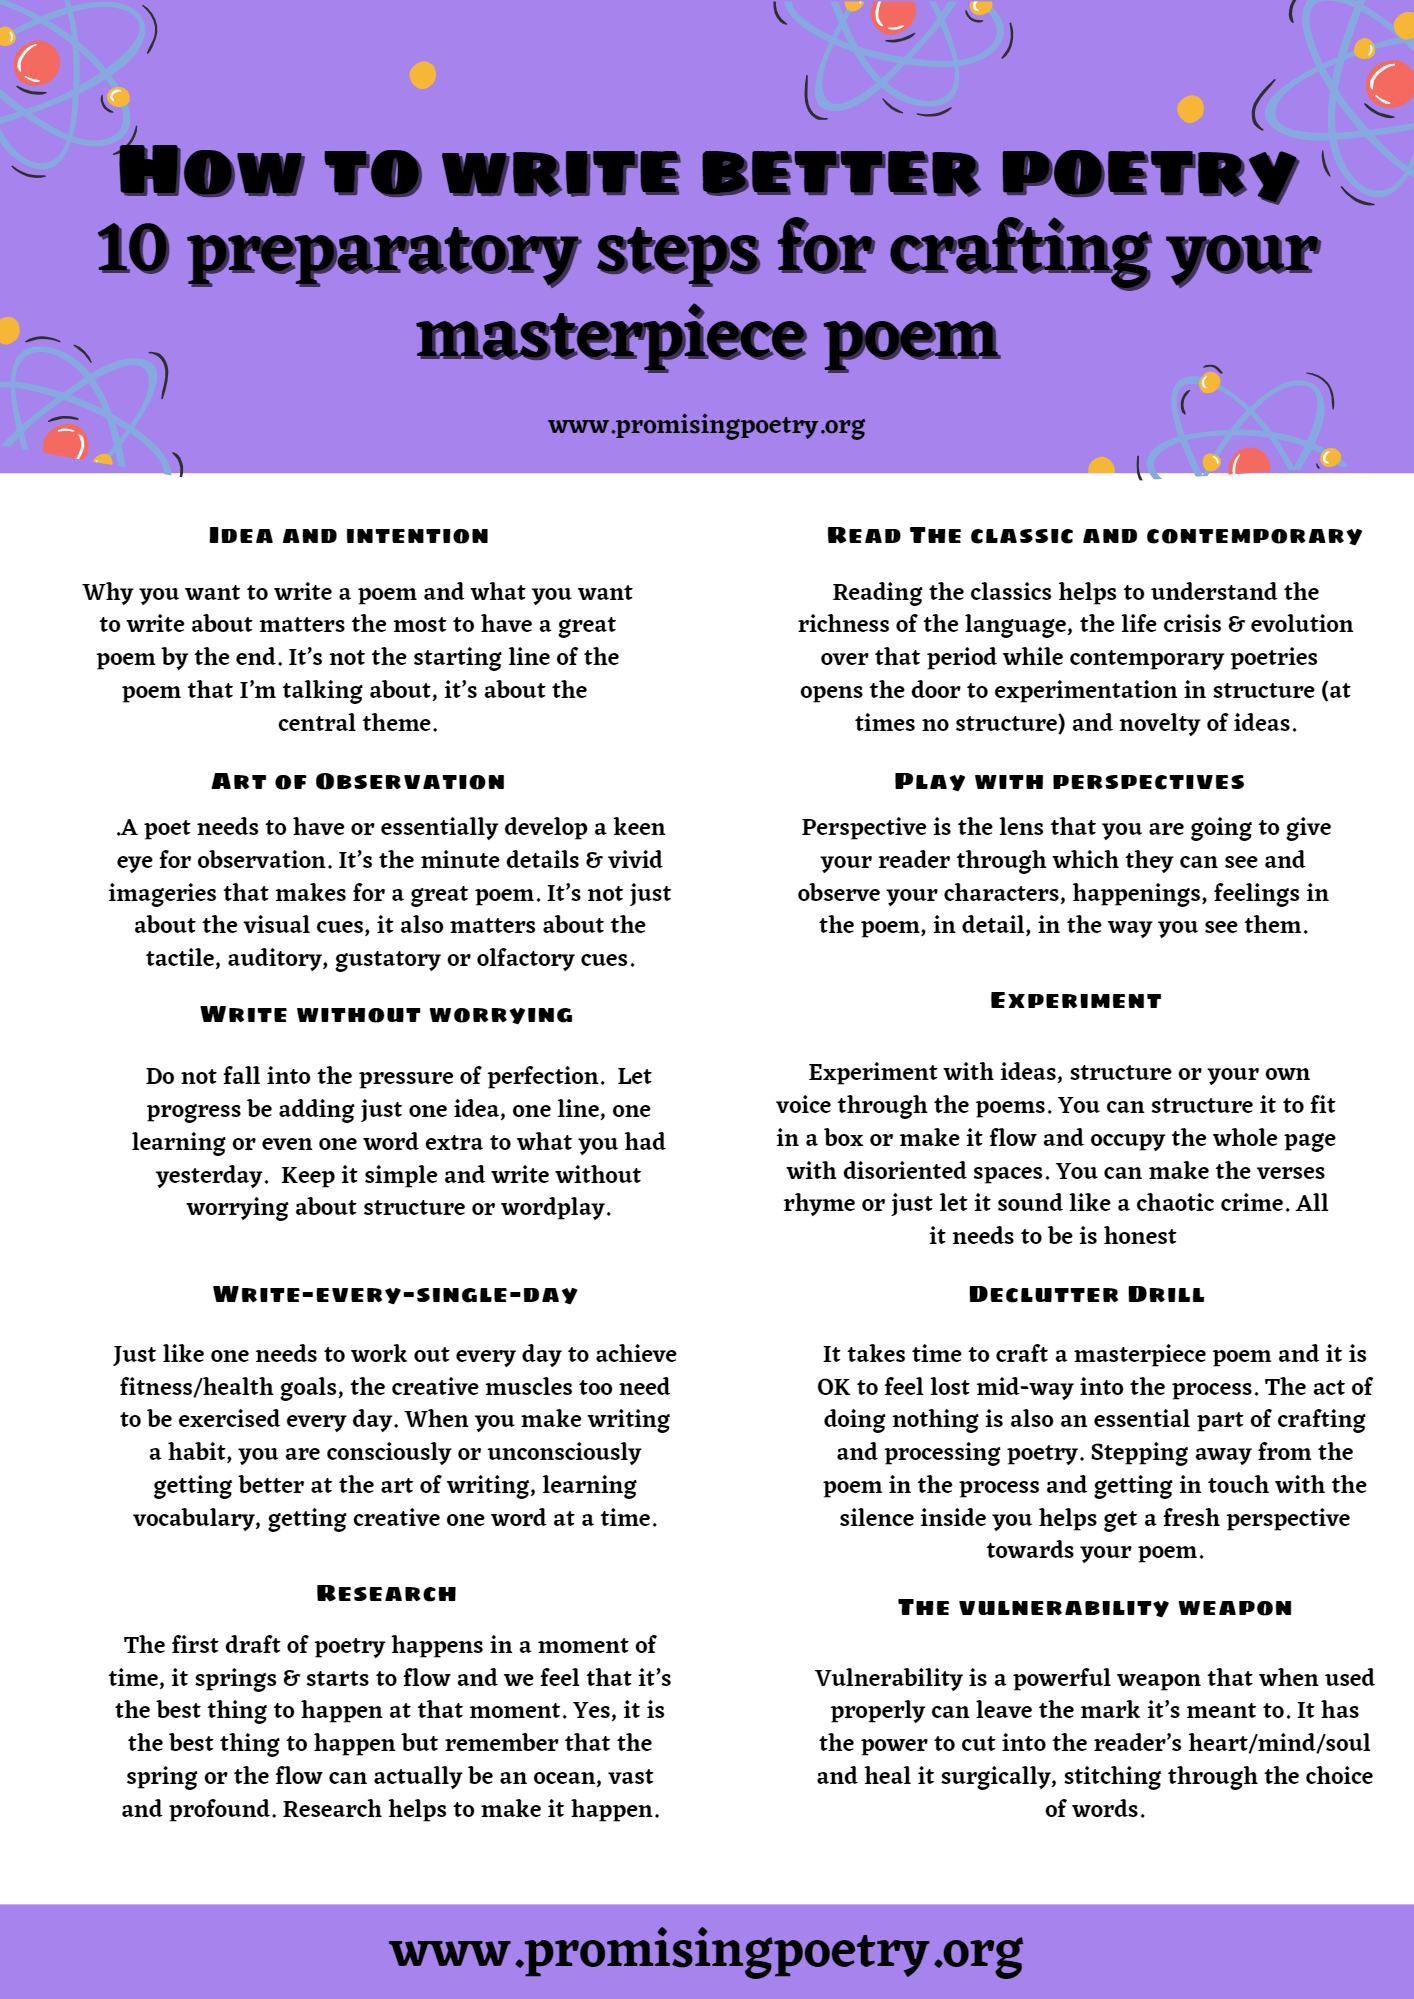 Printable on 10 preparatory steps to craft your masterpiece poem